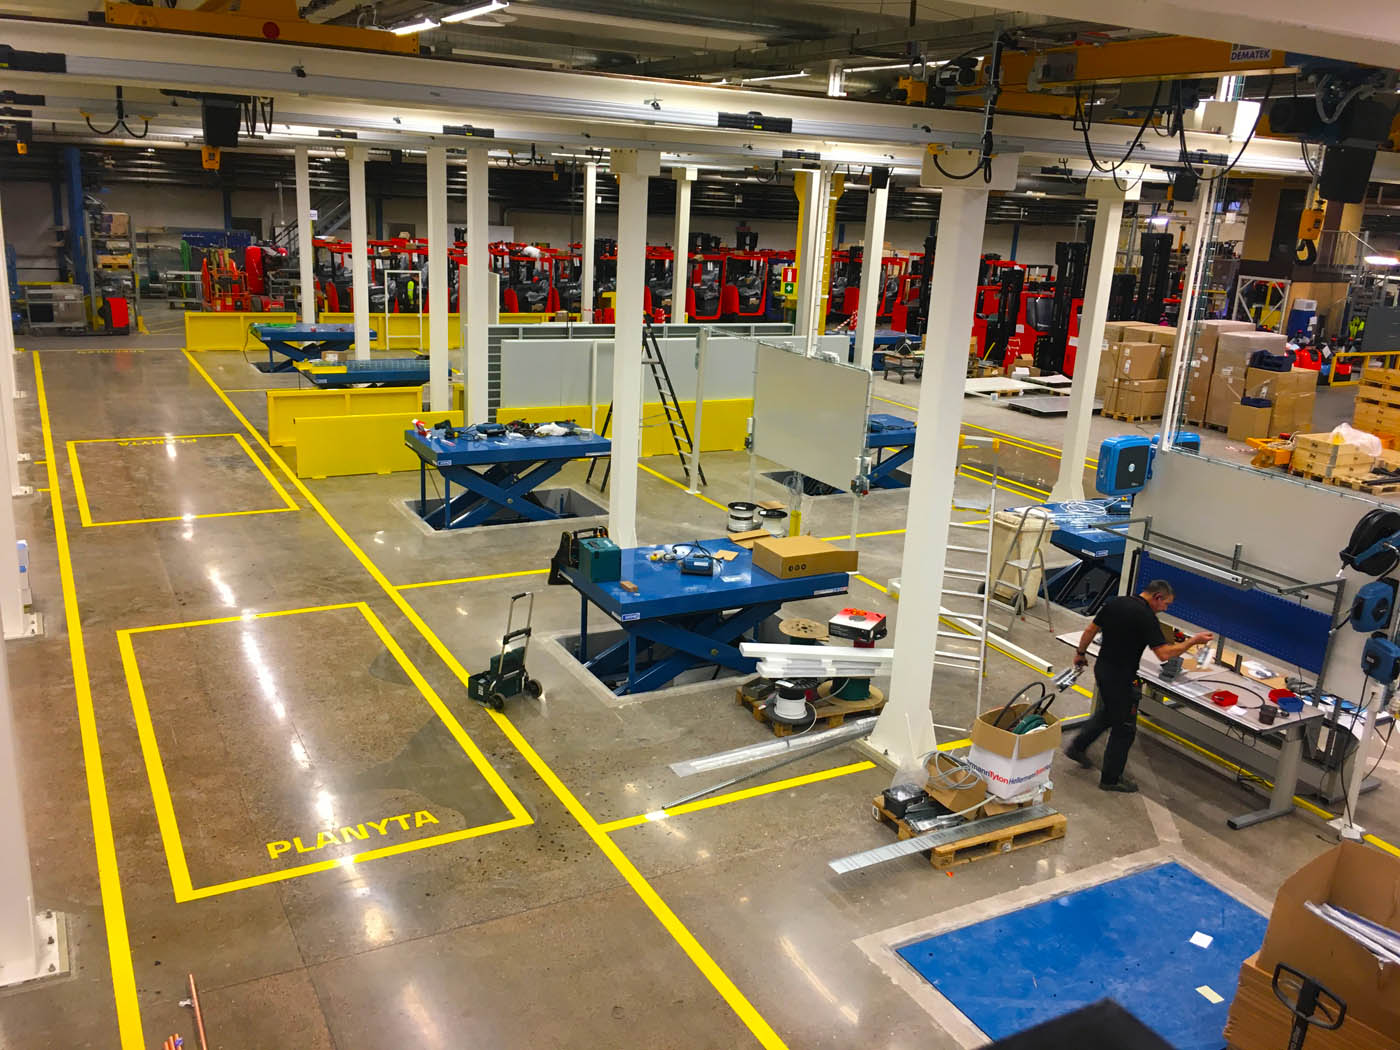 The new lift tables and production line in place, making sure that Toyota production flows well and is ergonomically sound.